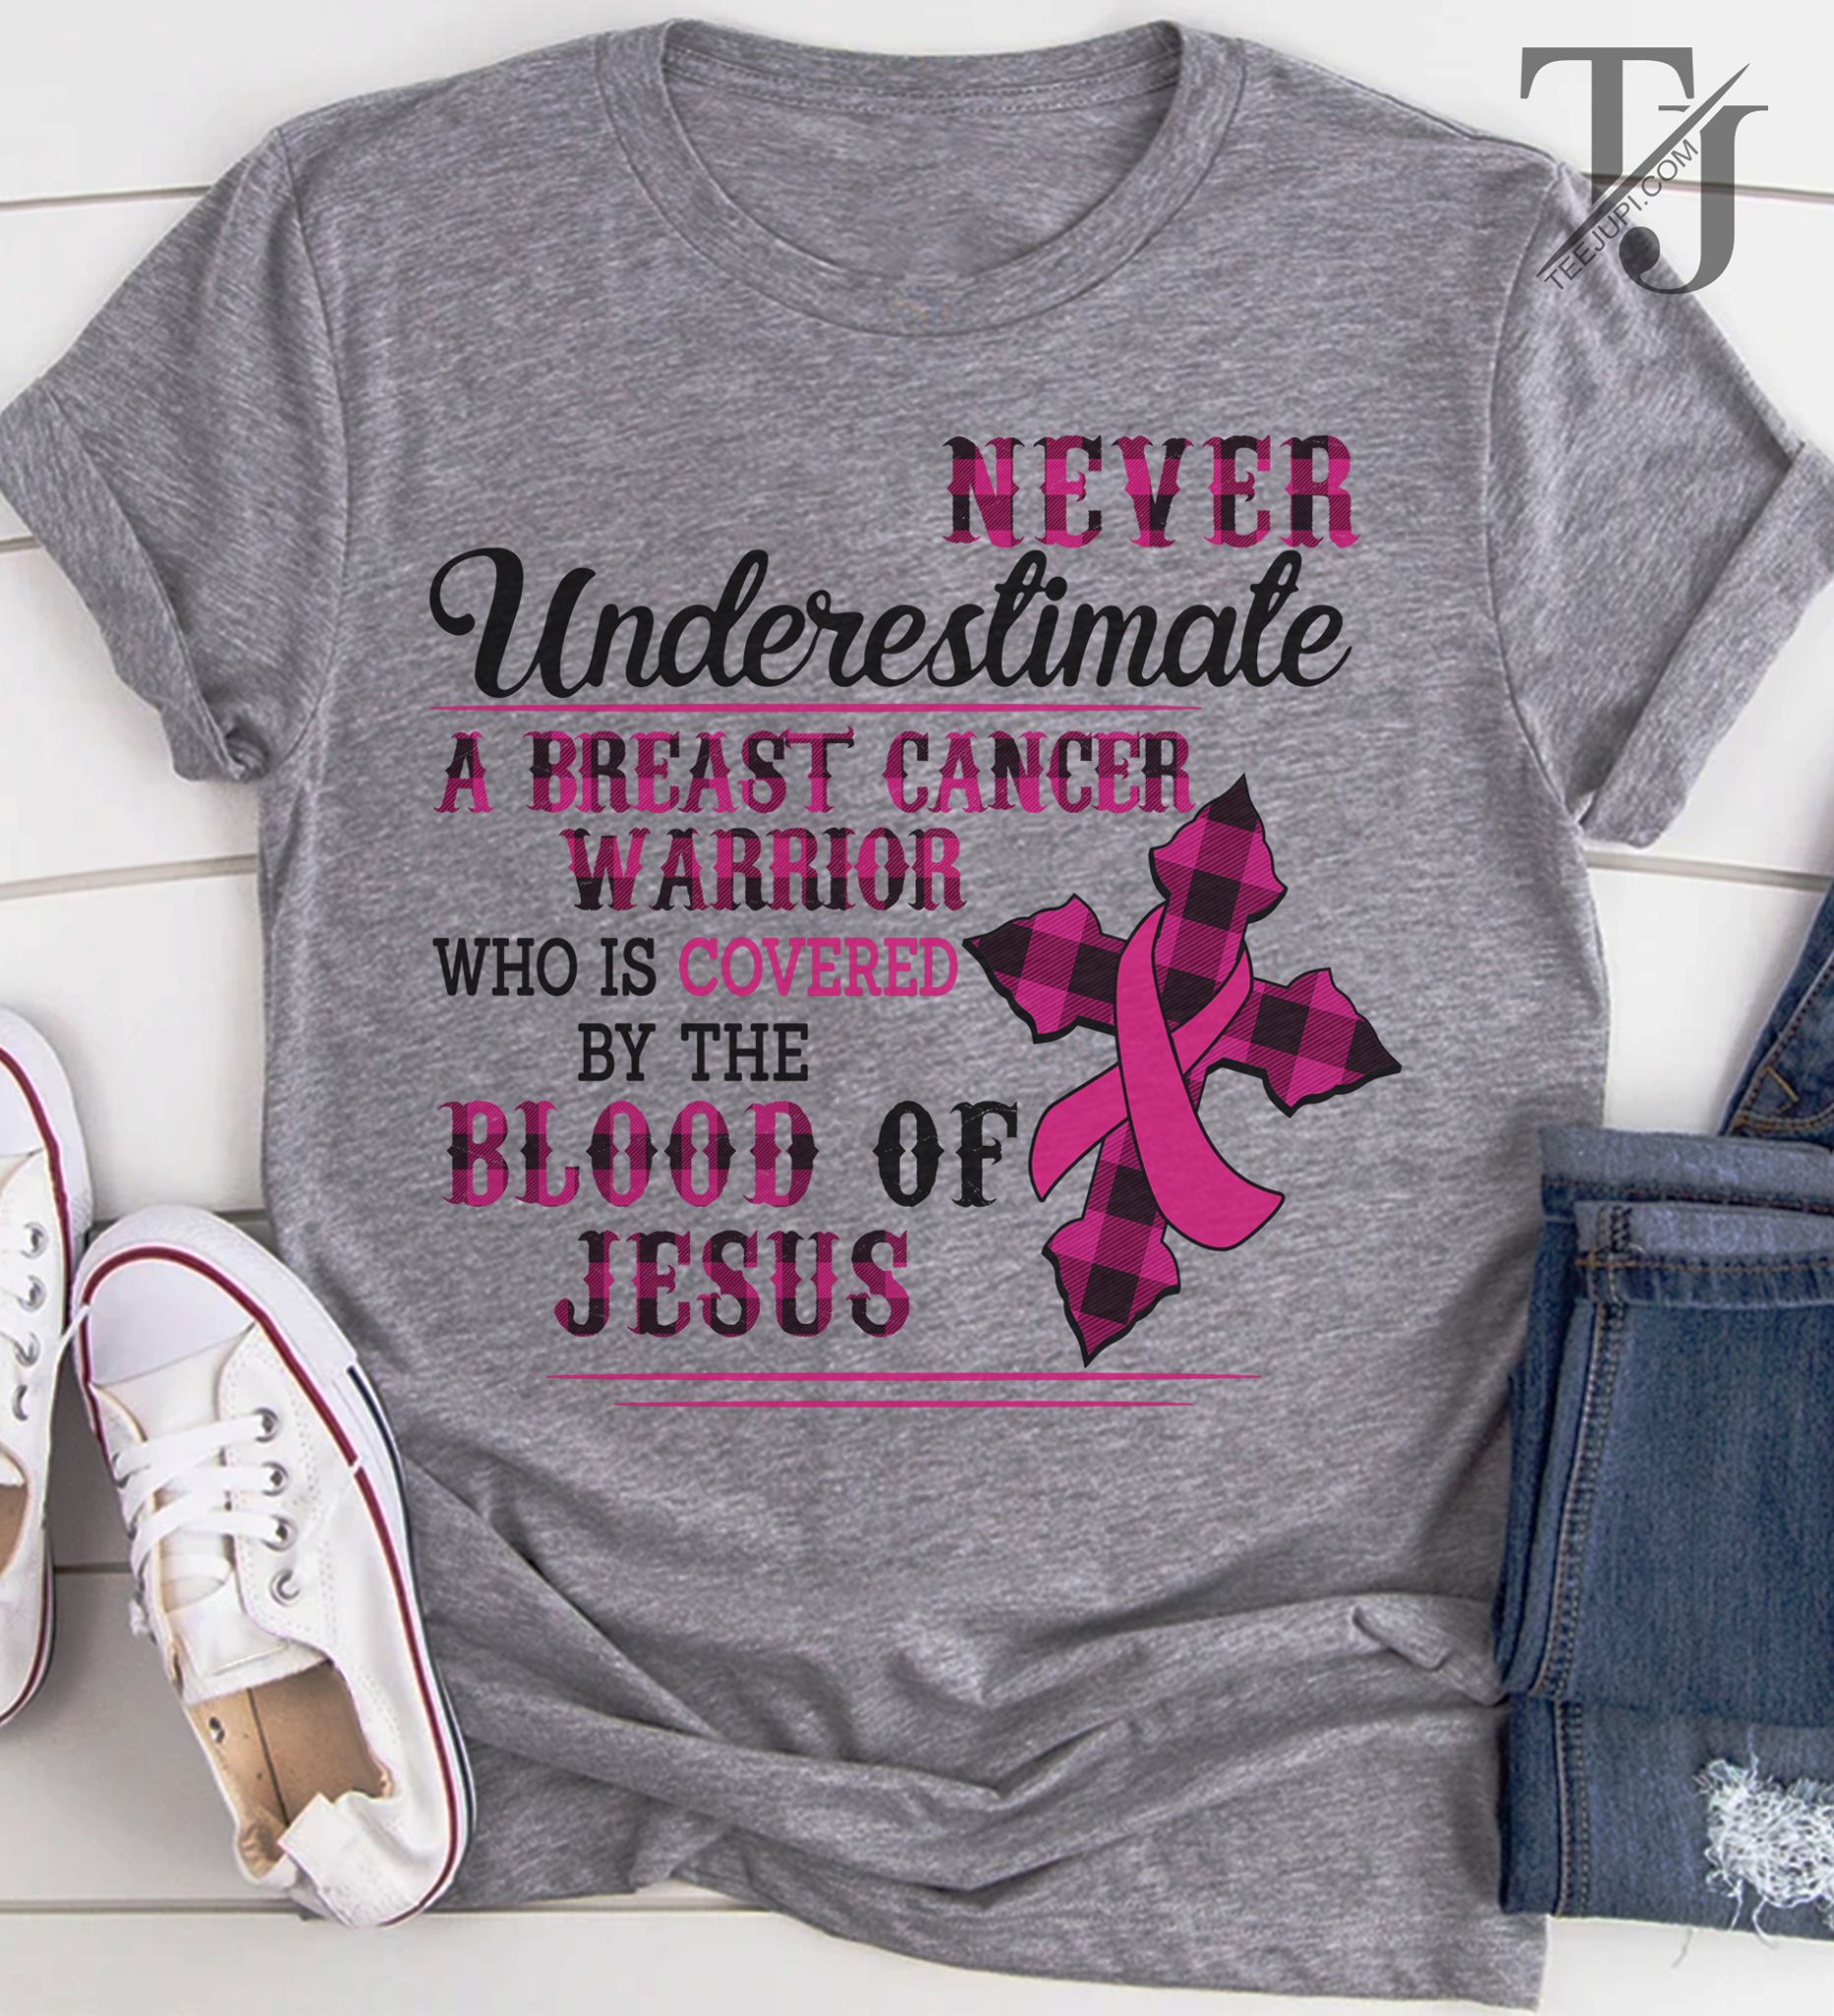 Never underestimate a breast cancer warrior who is covered by blood of Jesus - Breast cancer awareness